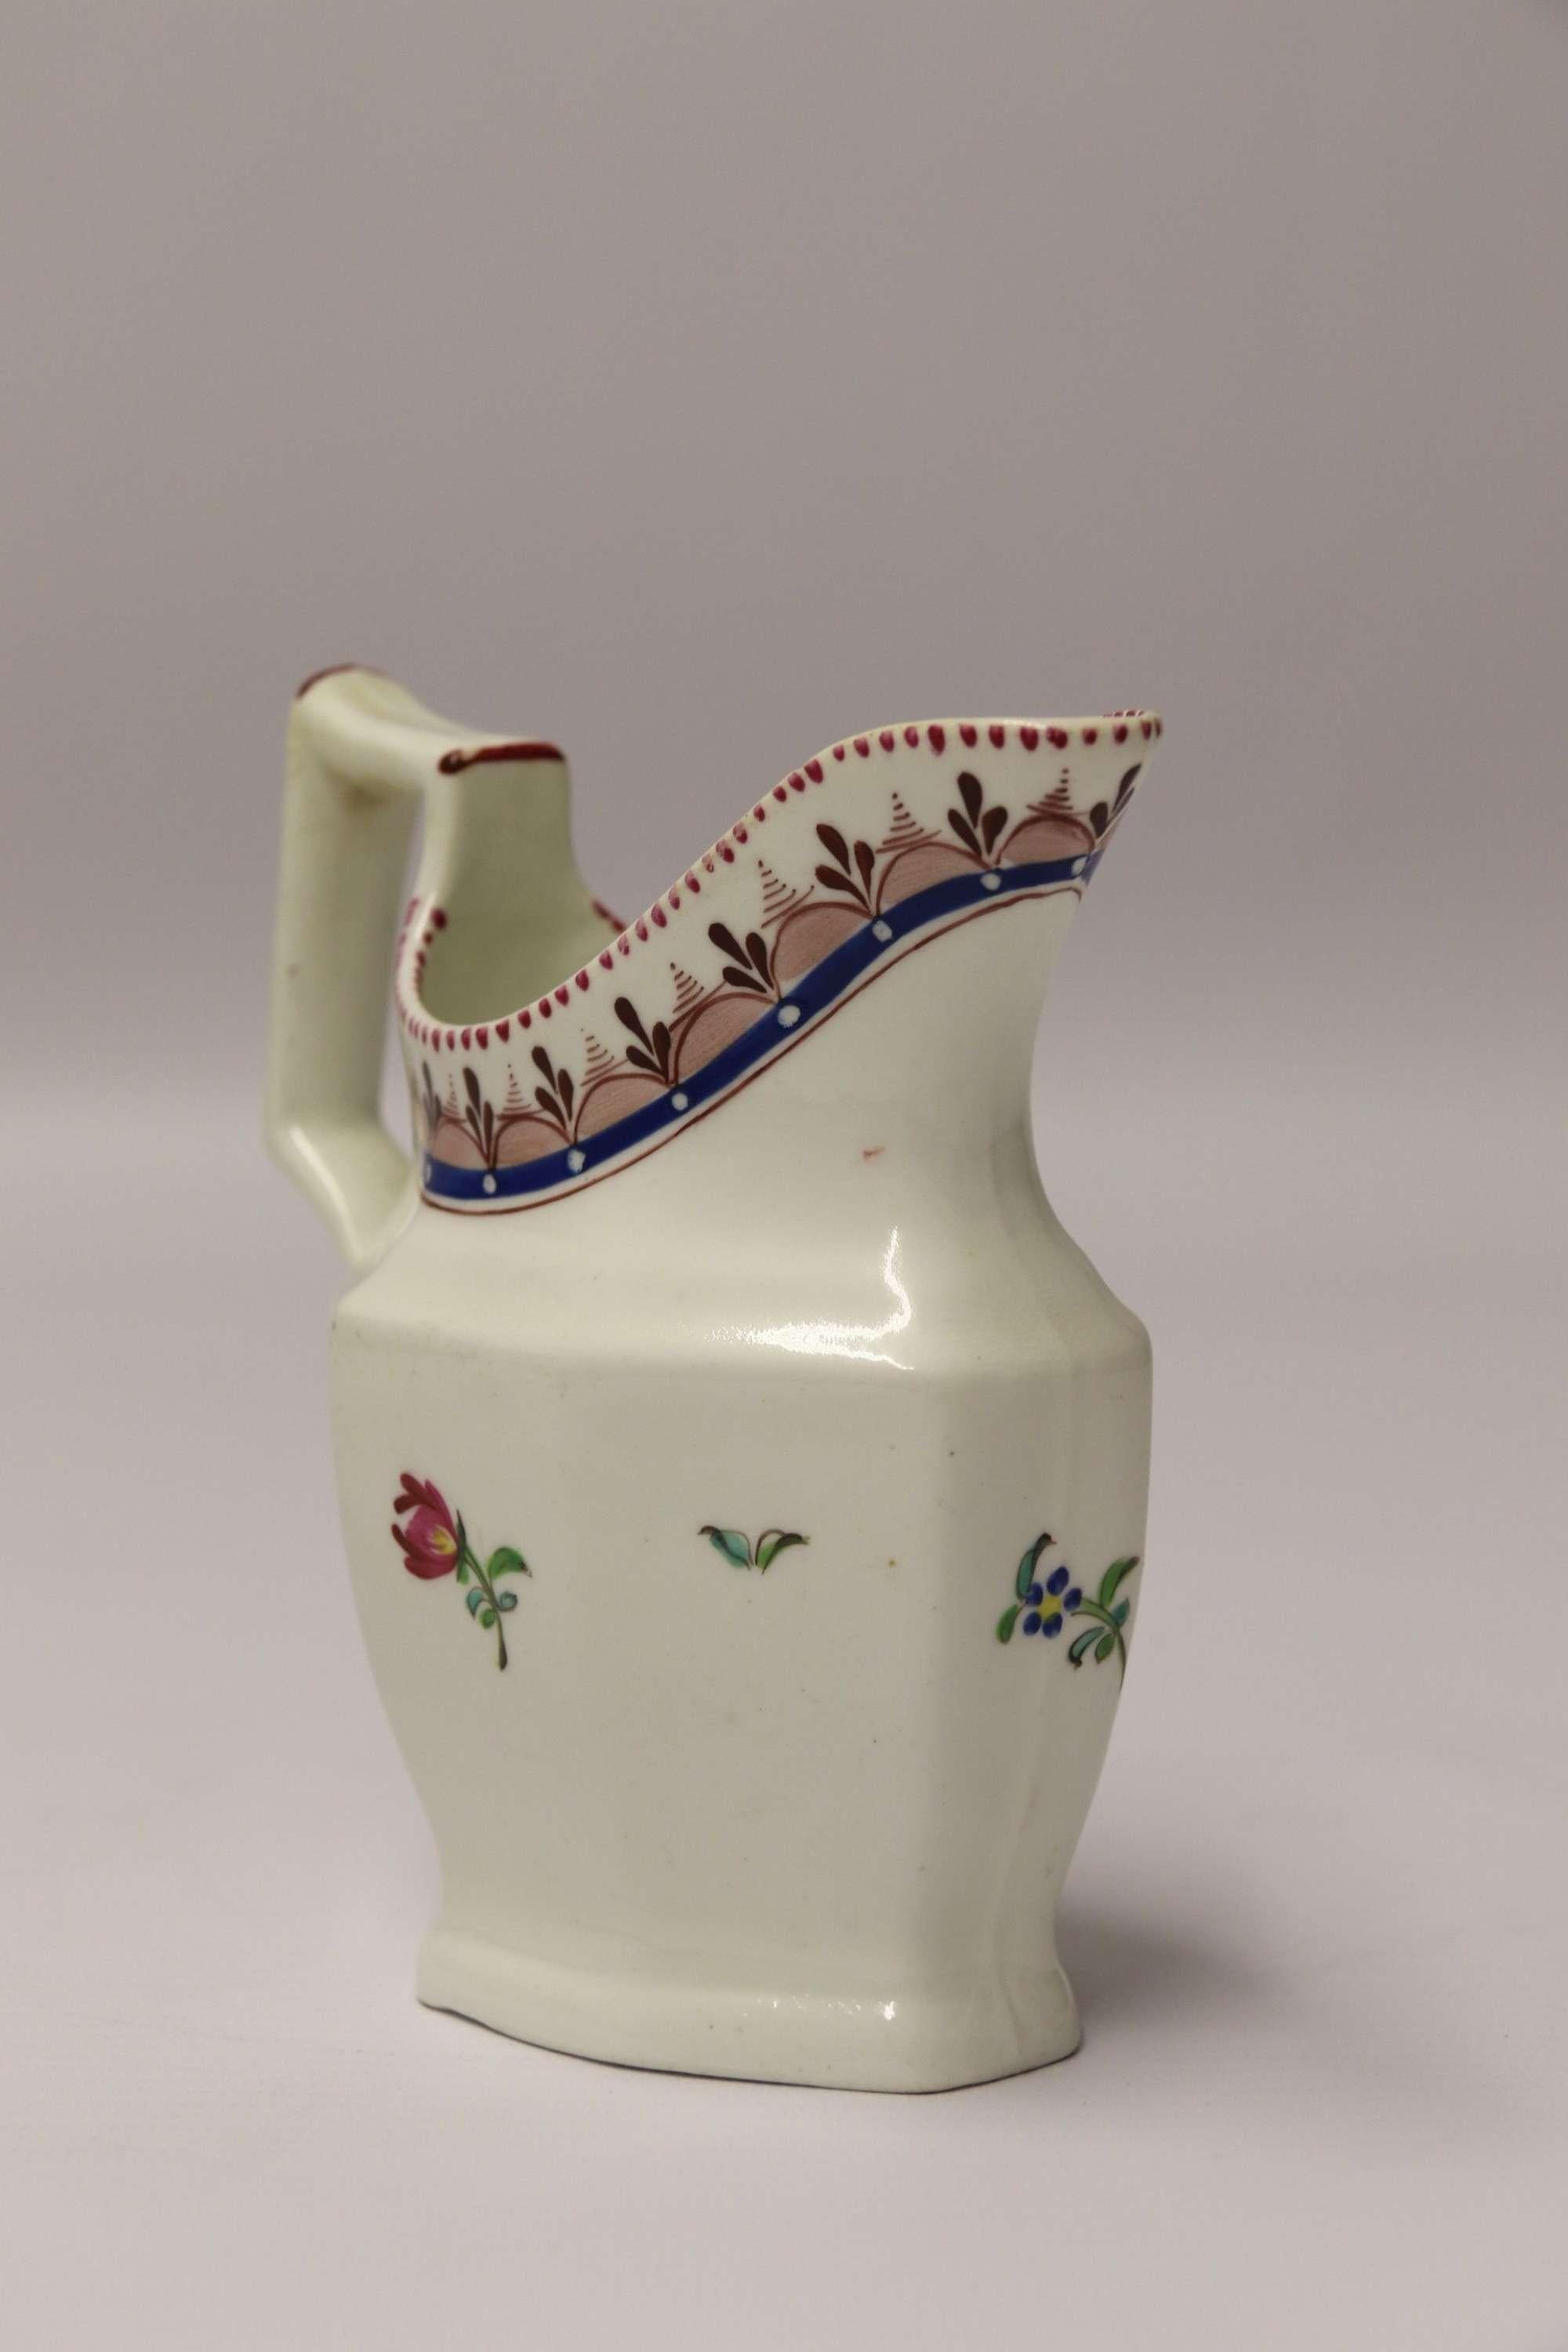 A rare 18th century liverpool/ herculaneum porcelain cream jug, circa 1795.

This rare cream jug dates to circa 1795 and is Liverpool porcelain. John Pennington/Herculaneum. It is of flattened octagonal form with a flared spout and shaped handle.